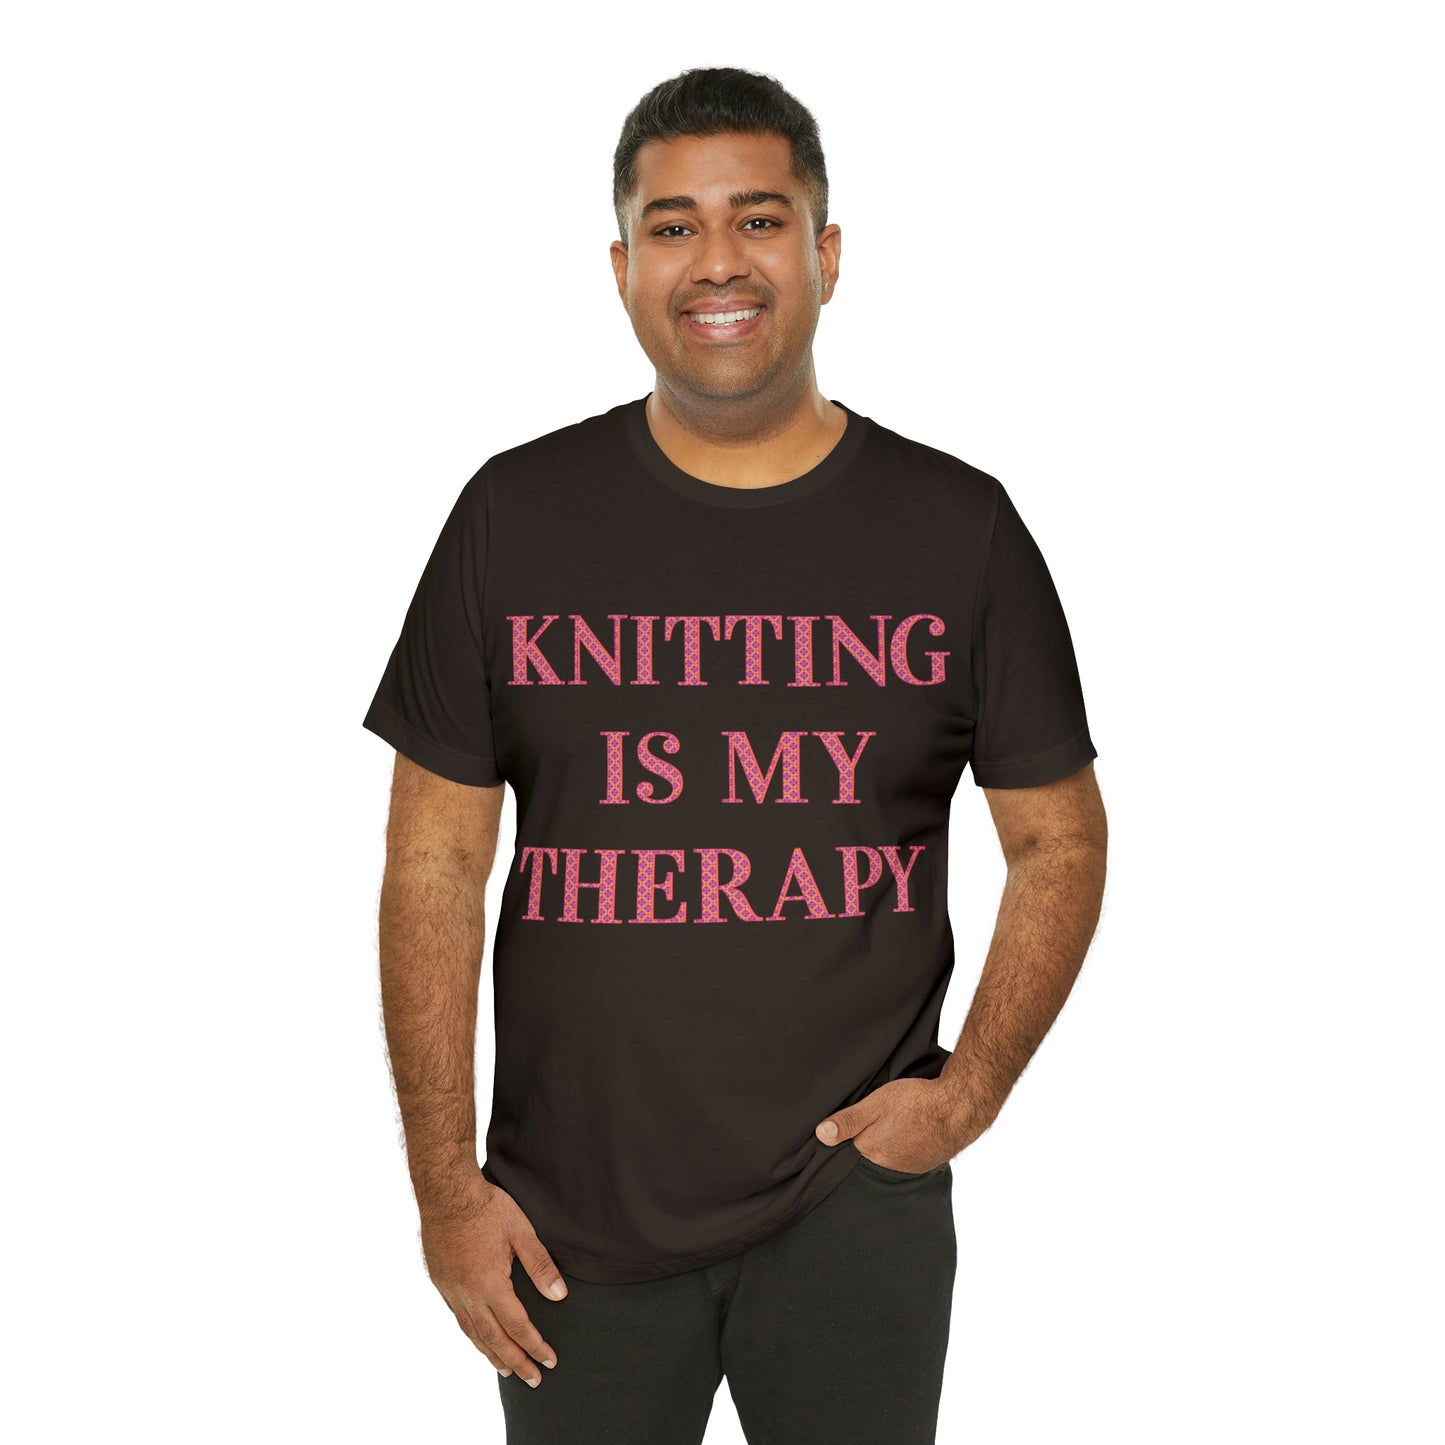 Knitting Is My Therapy- Adult, Regular Fit, Soft Cotton T-shirt